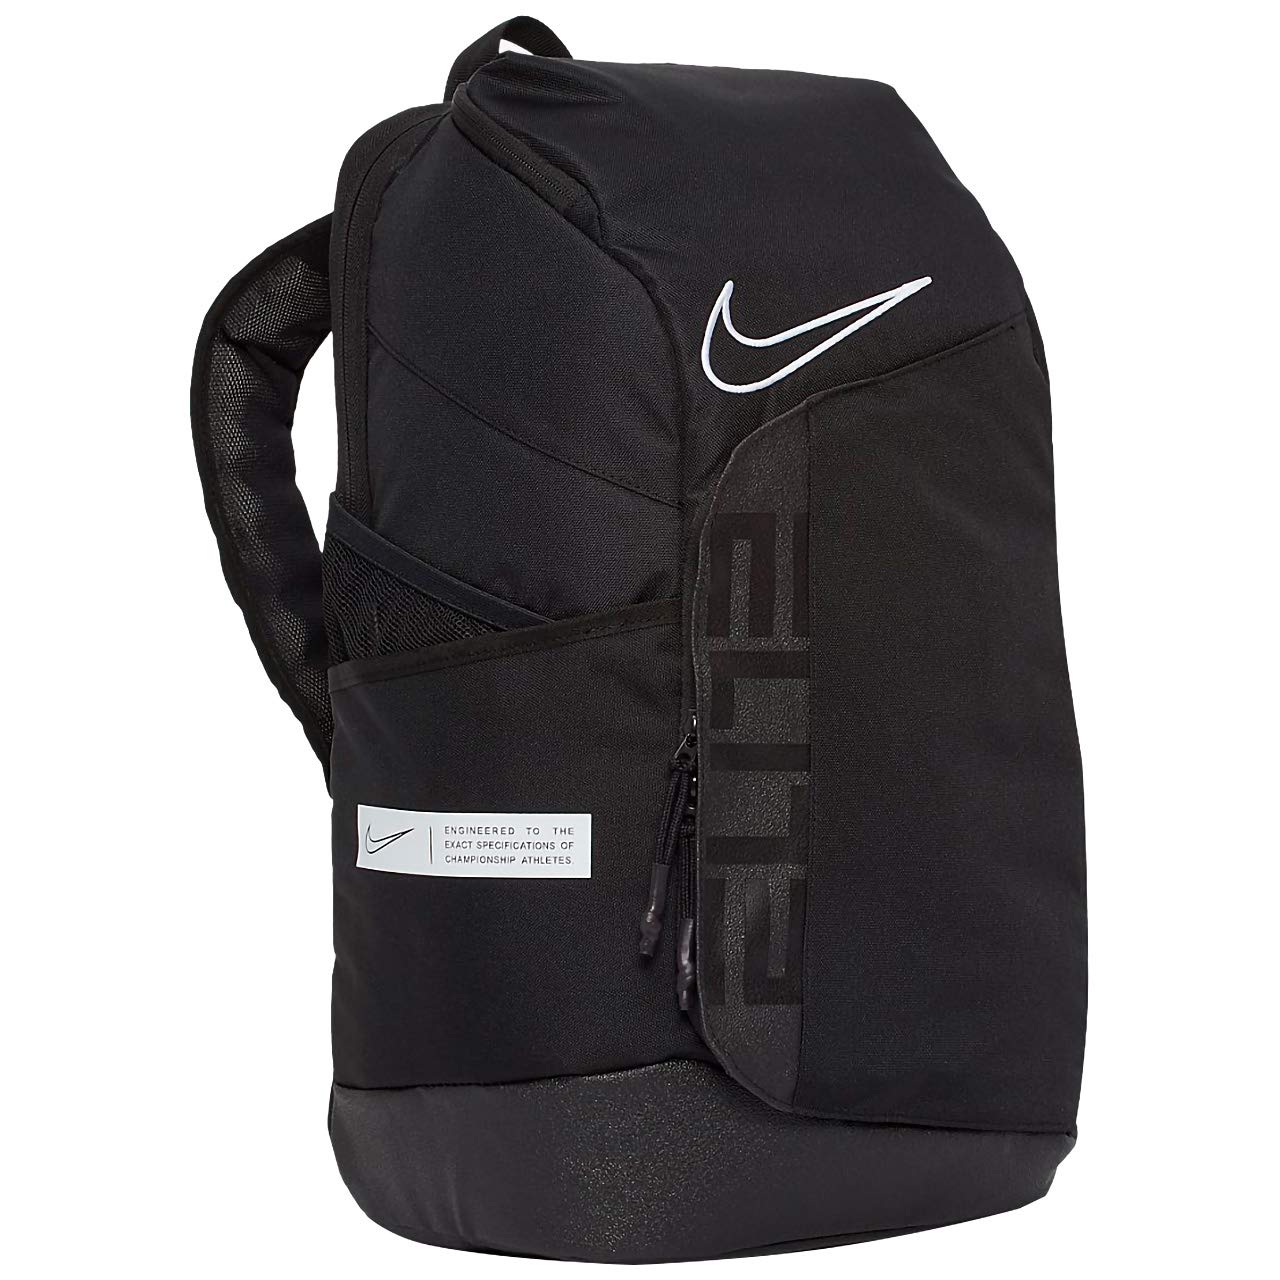 Point 3 Basketball Bag for Sale in Los Angeles, CA - OfferUp